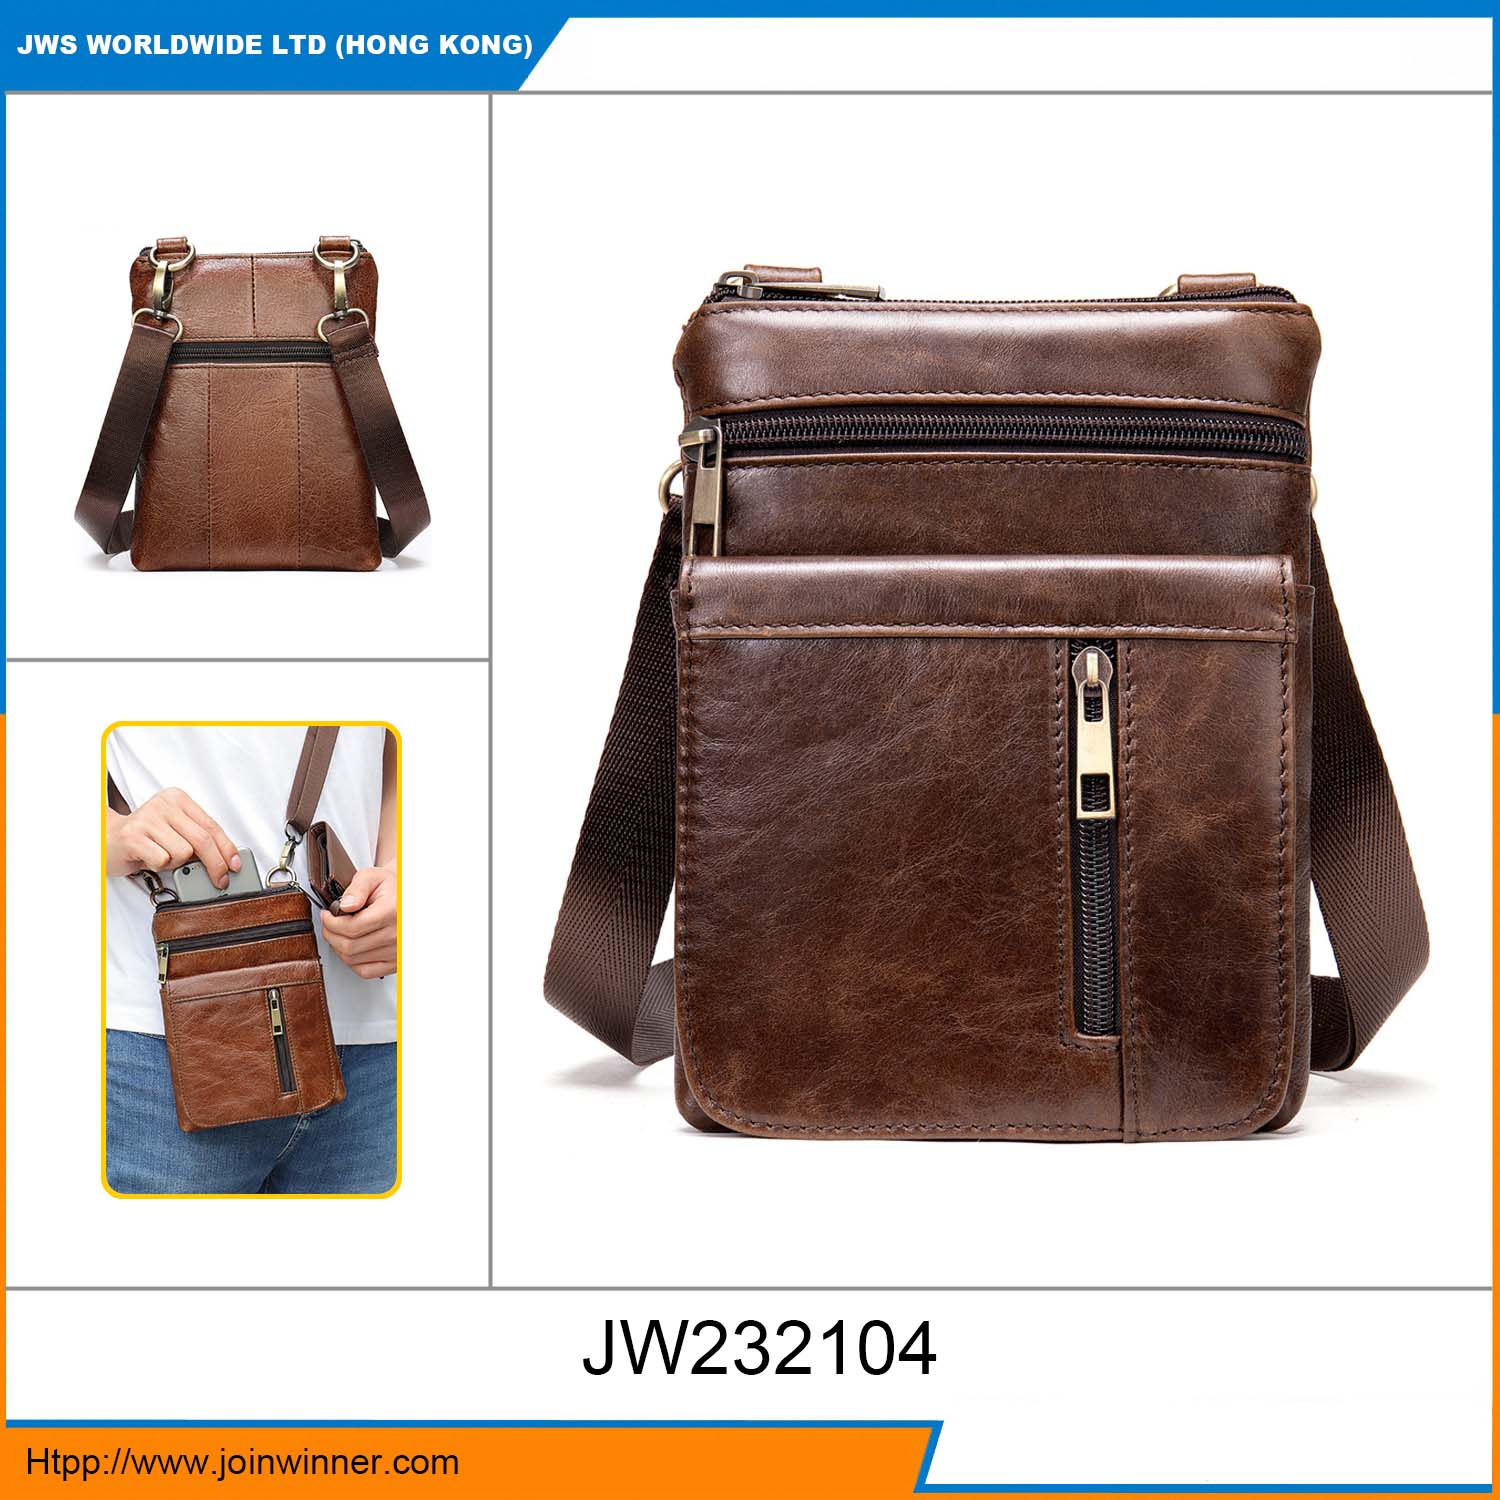 Real-Leather Bag